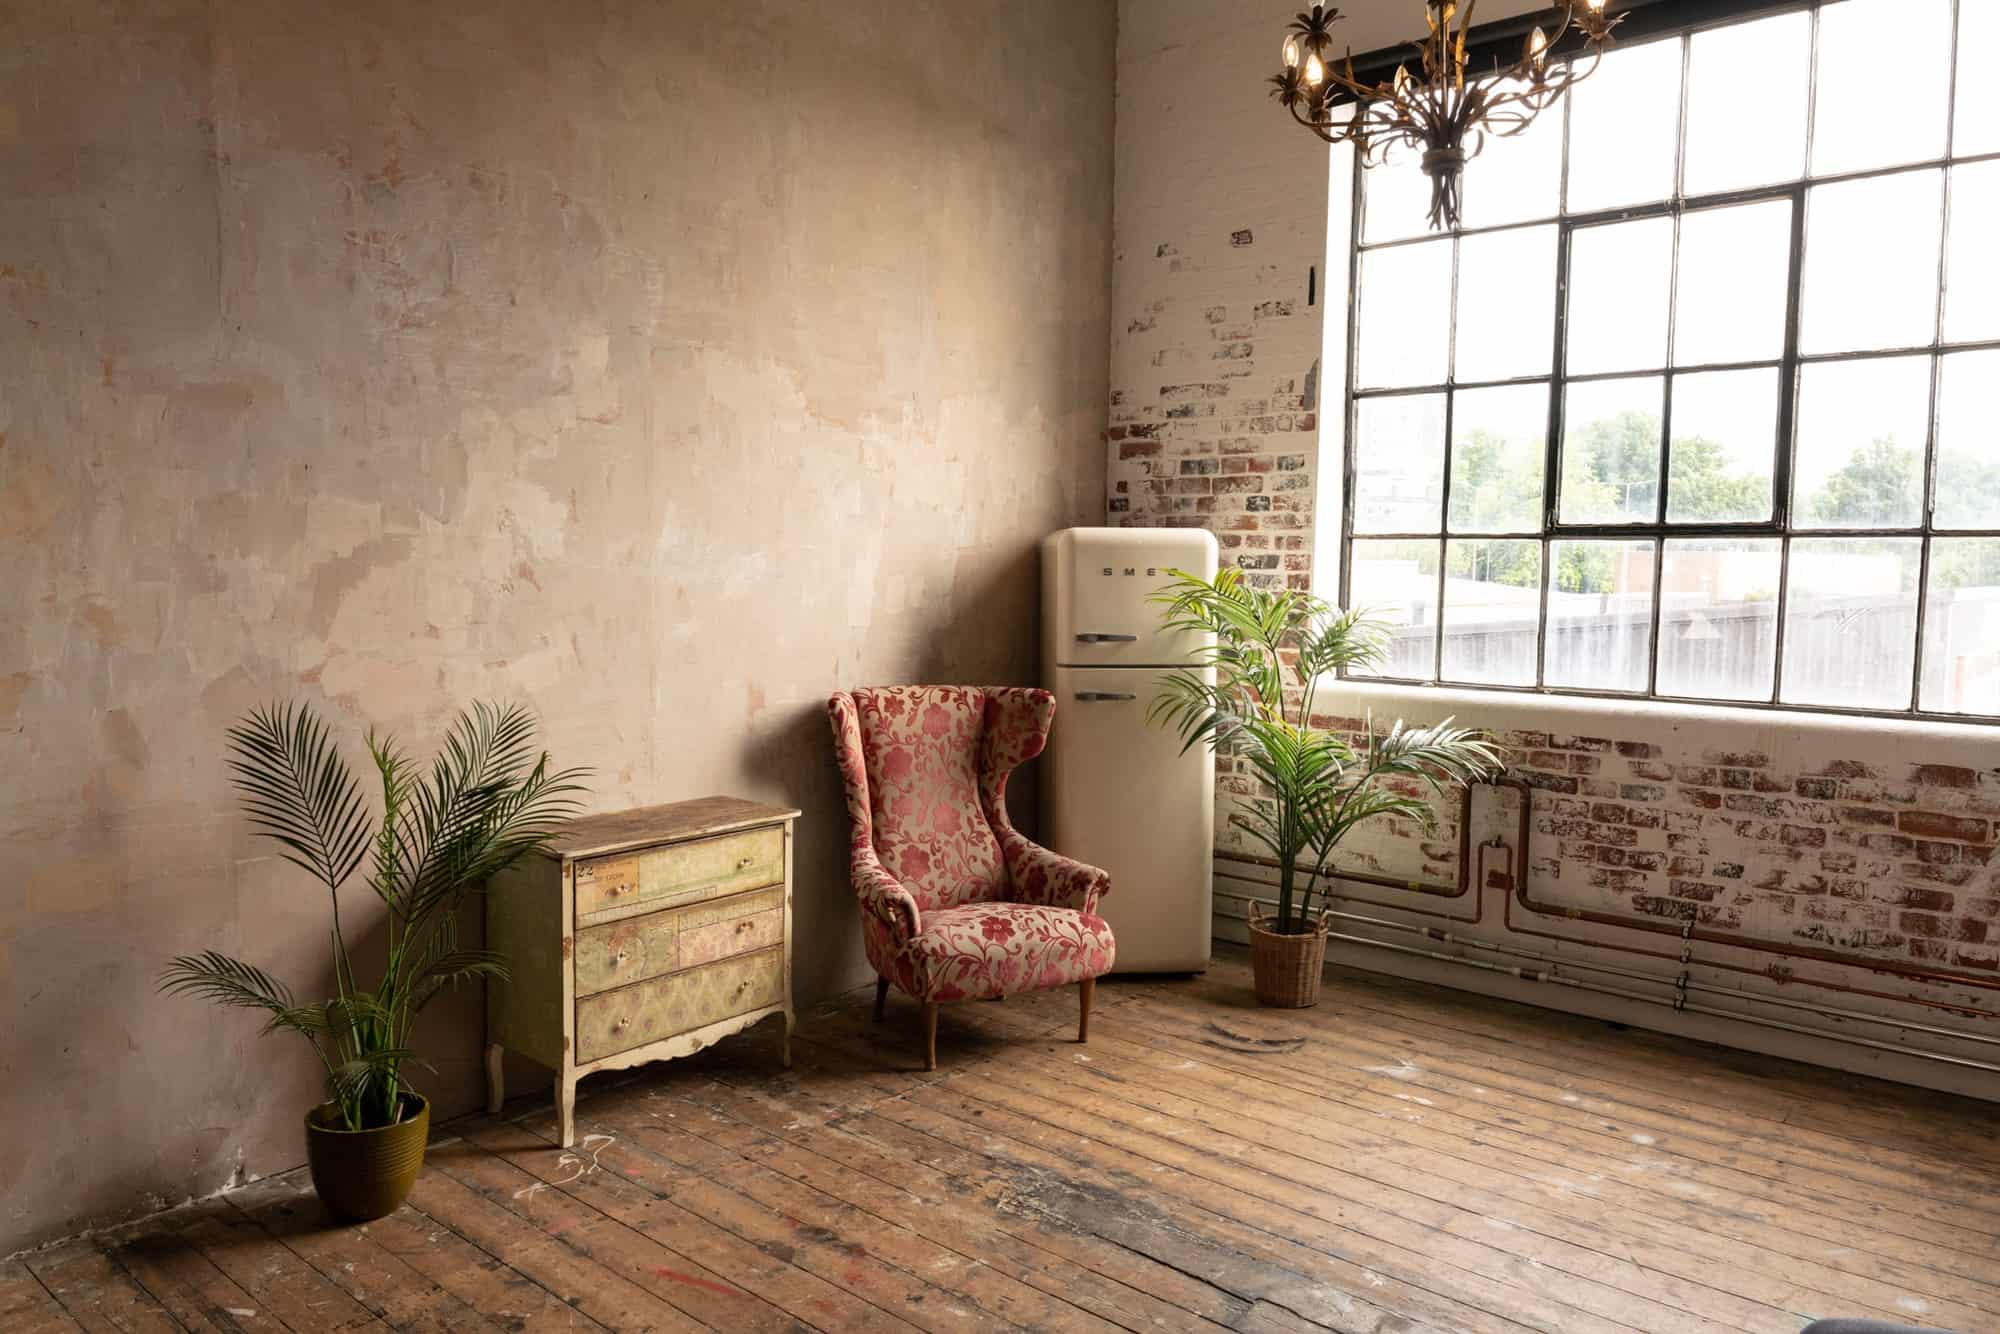 Bohemian Studio SE18 - A versatile studio space with different backdrops and some industrial elements - The Location Guys